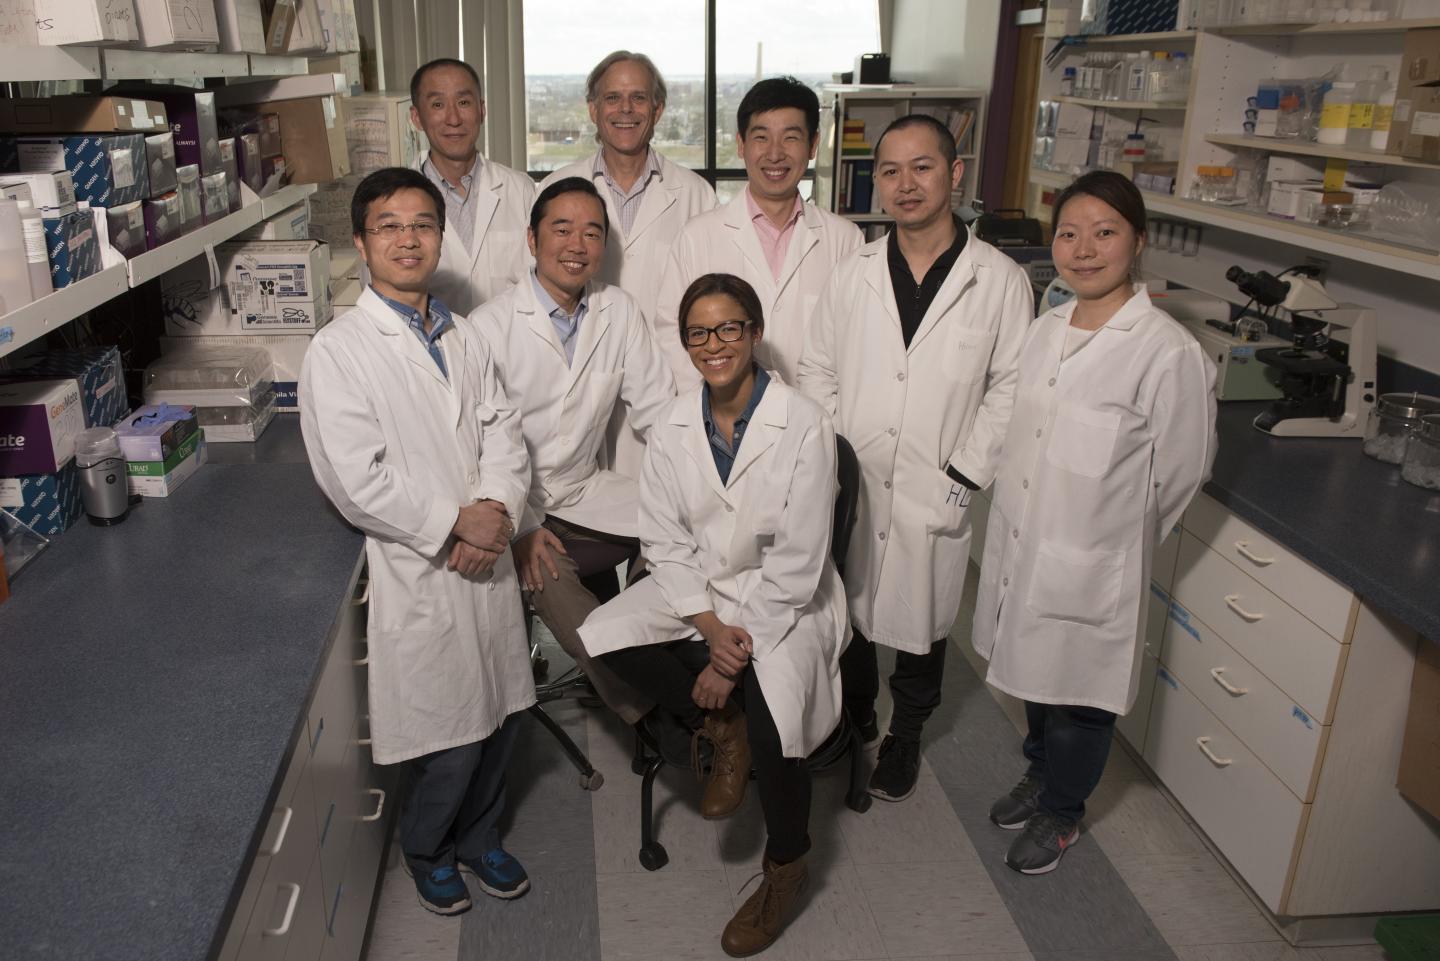 Zhe Han, Ph.D., and His Lab